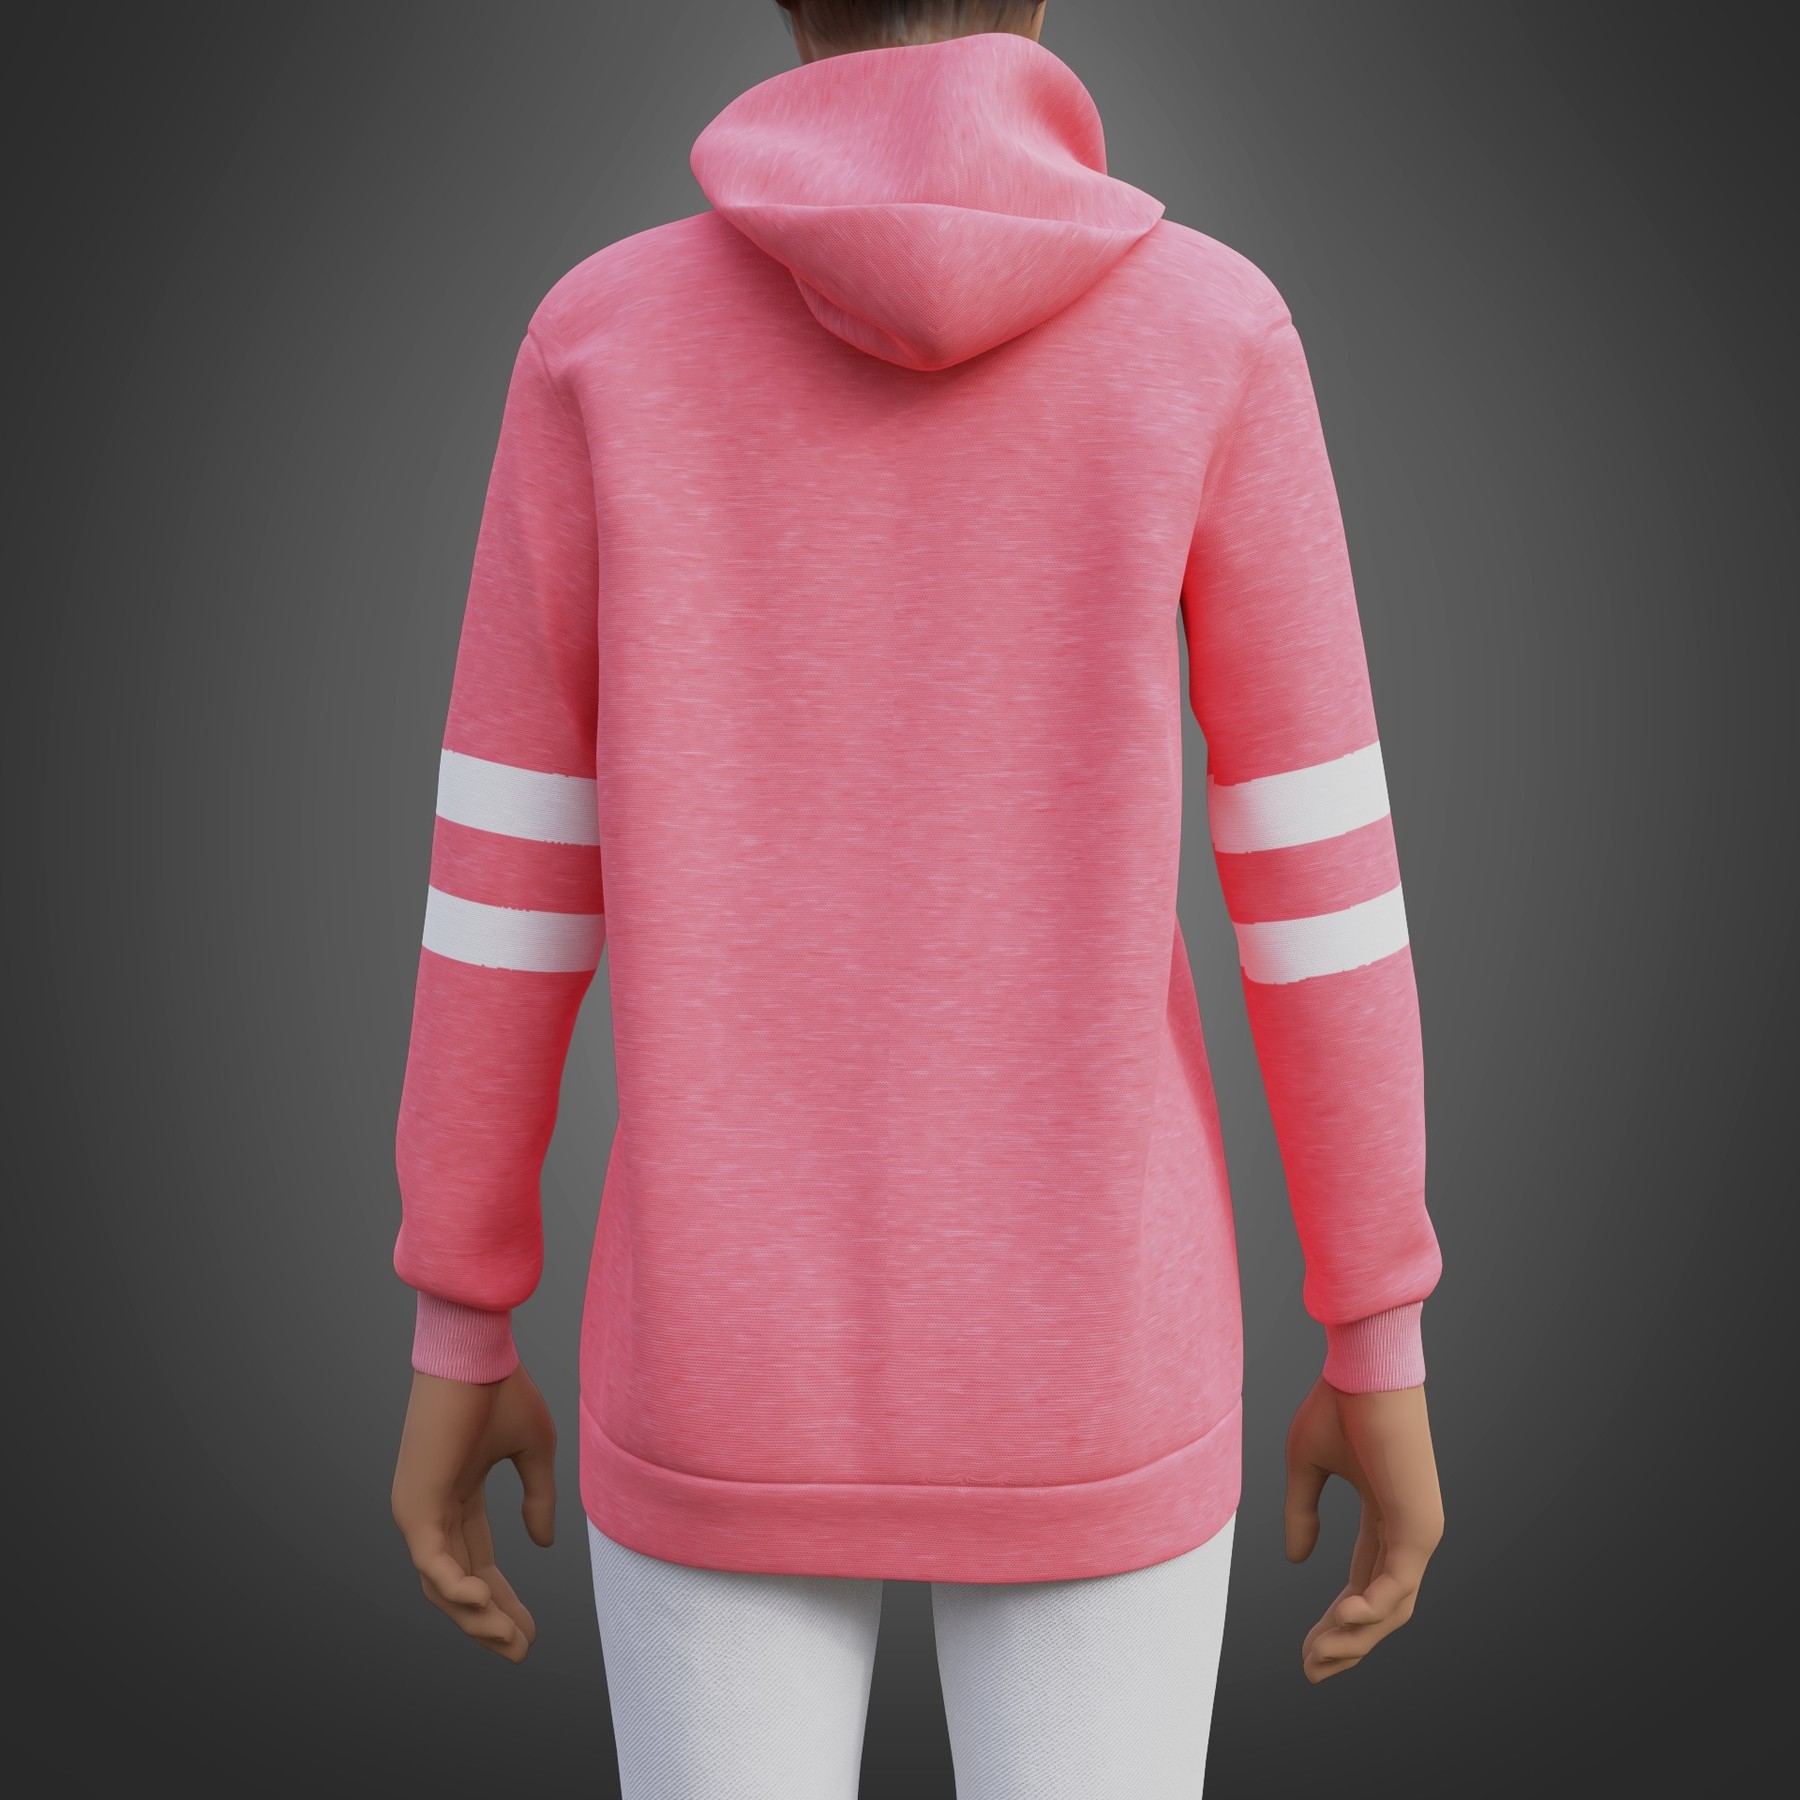 ArtStation - Cute outfit - pink oversized hoodie and leggings 3D Model |  Game Assets